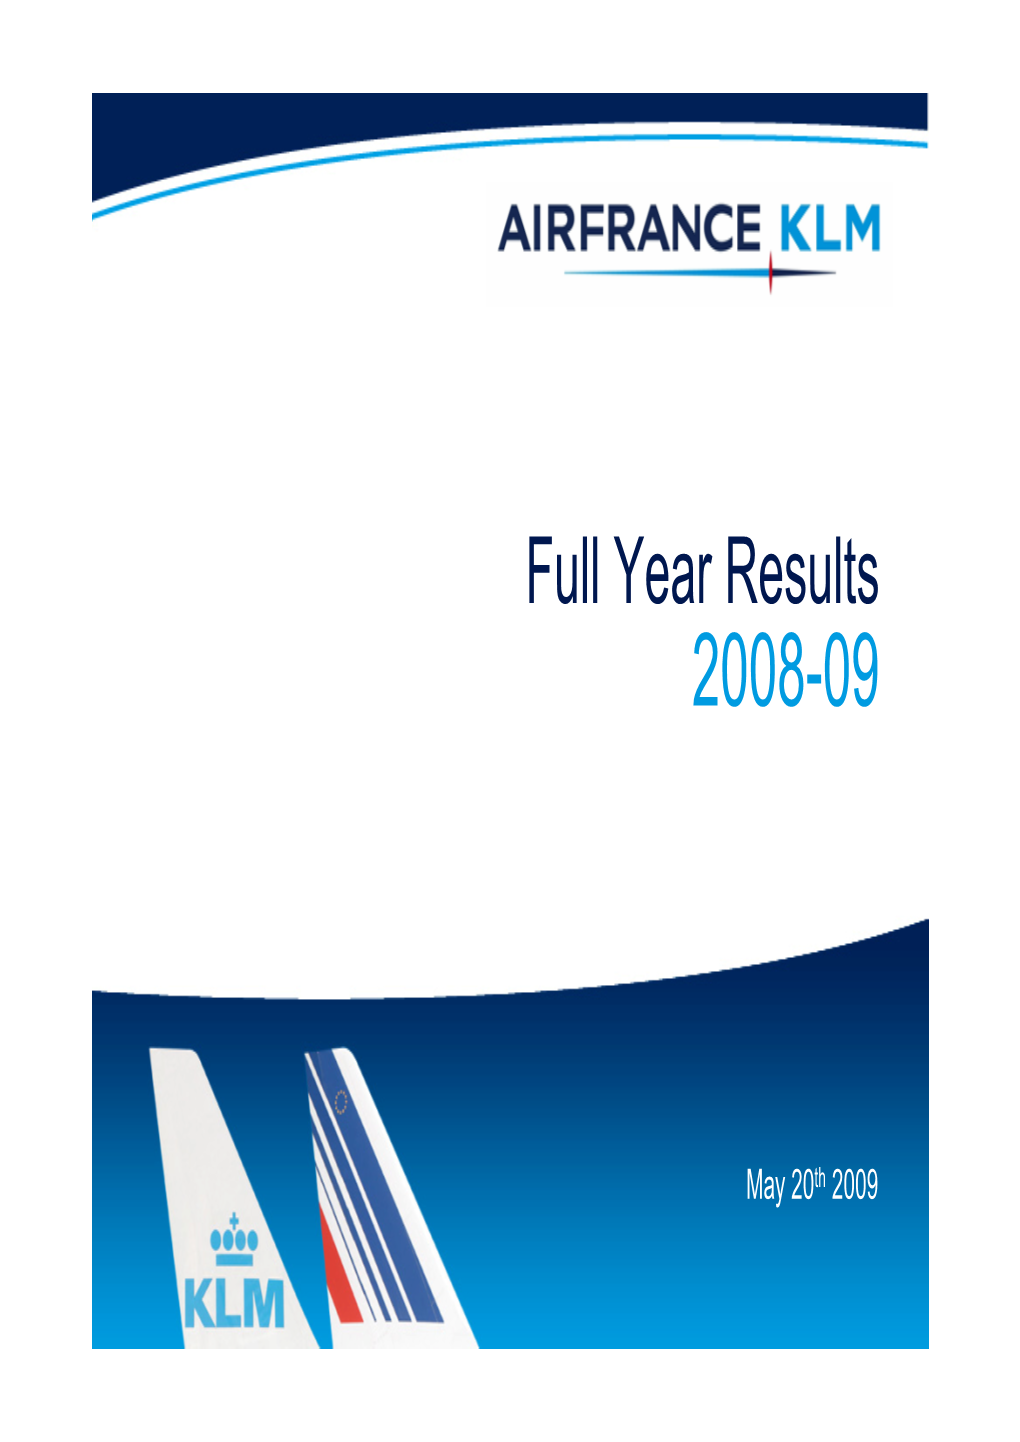 Full Year Results 2008-09